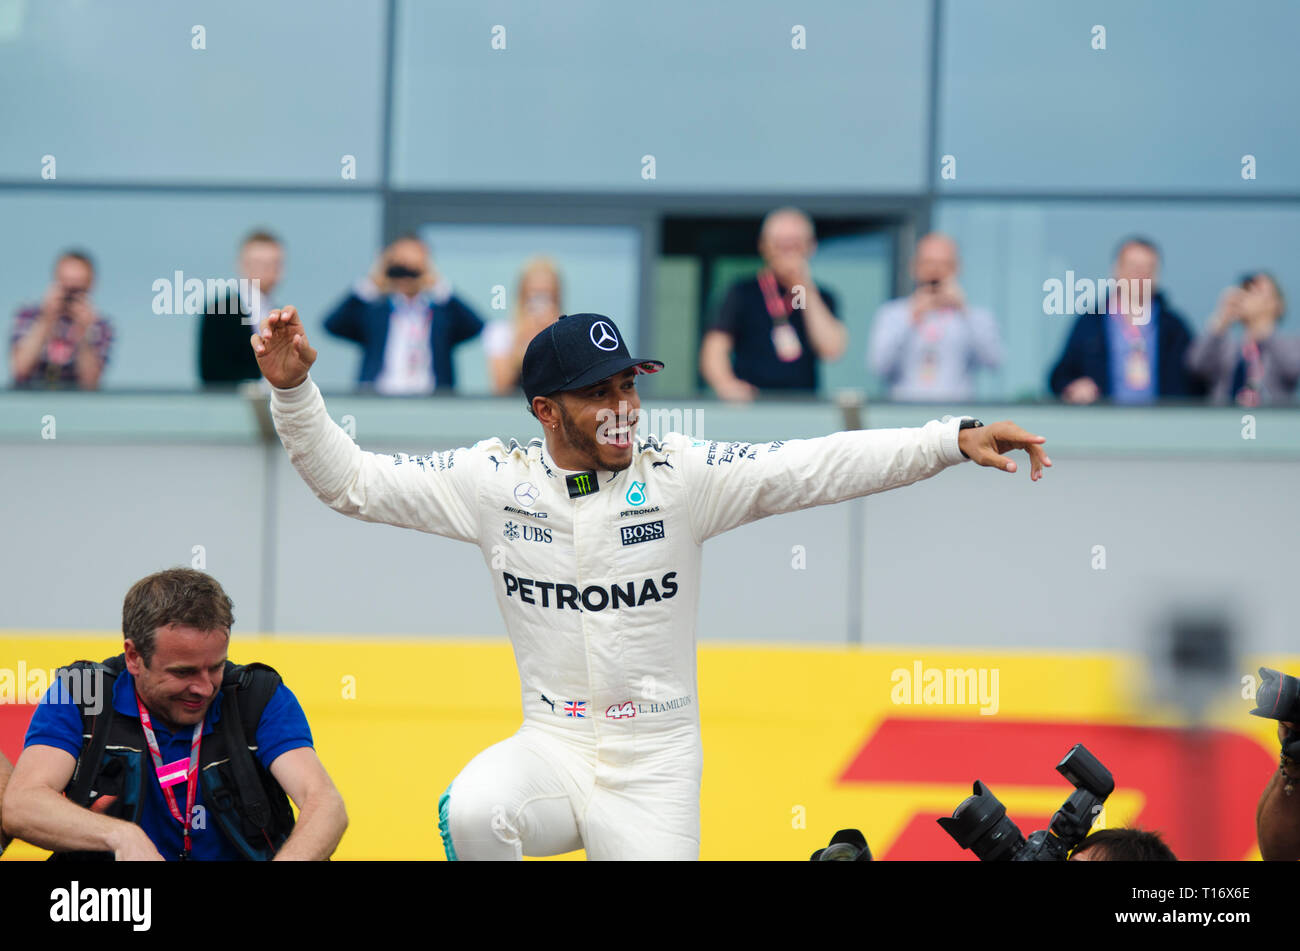 Lewis Hamilton celebrating after winning the British F1 Grand Prix at Silverstone in 2017. Stock Photo